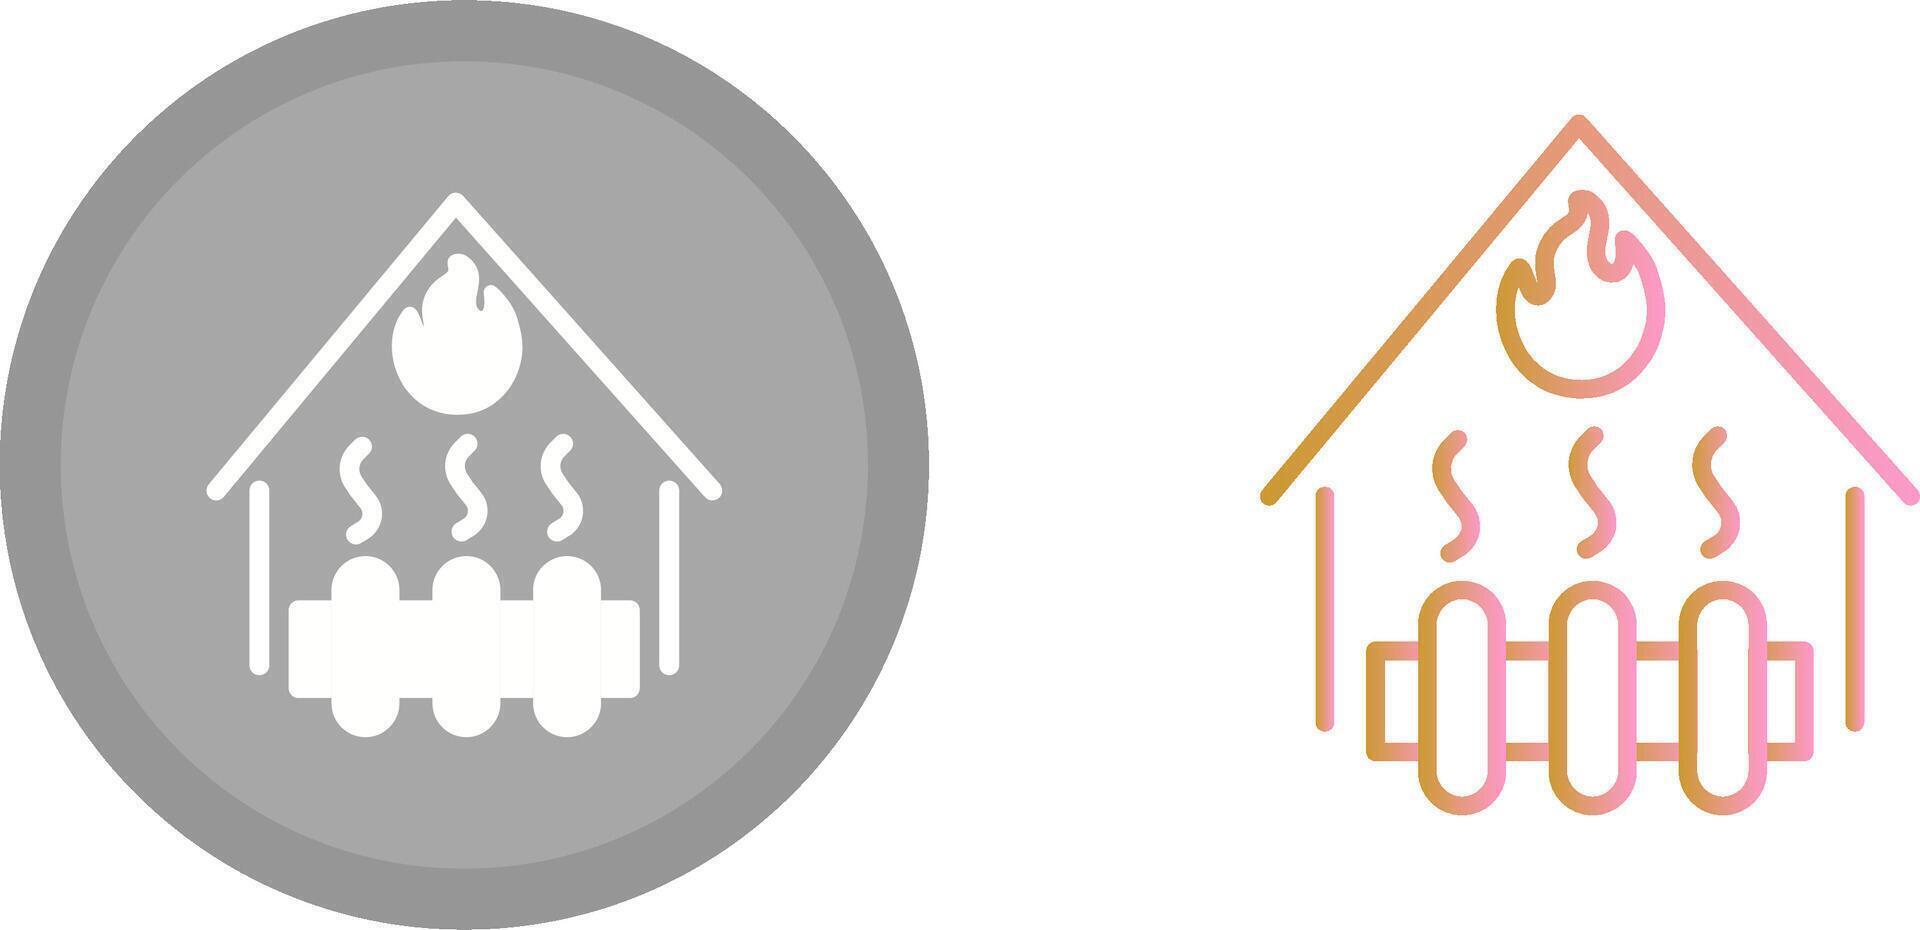 Heating System Icon vector